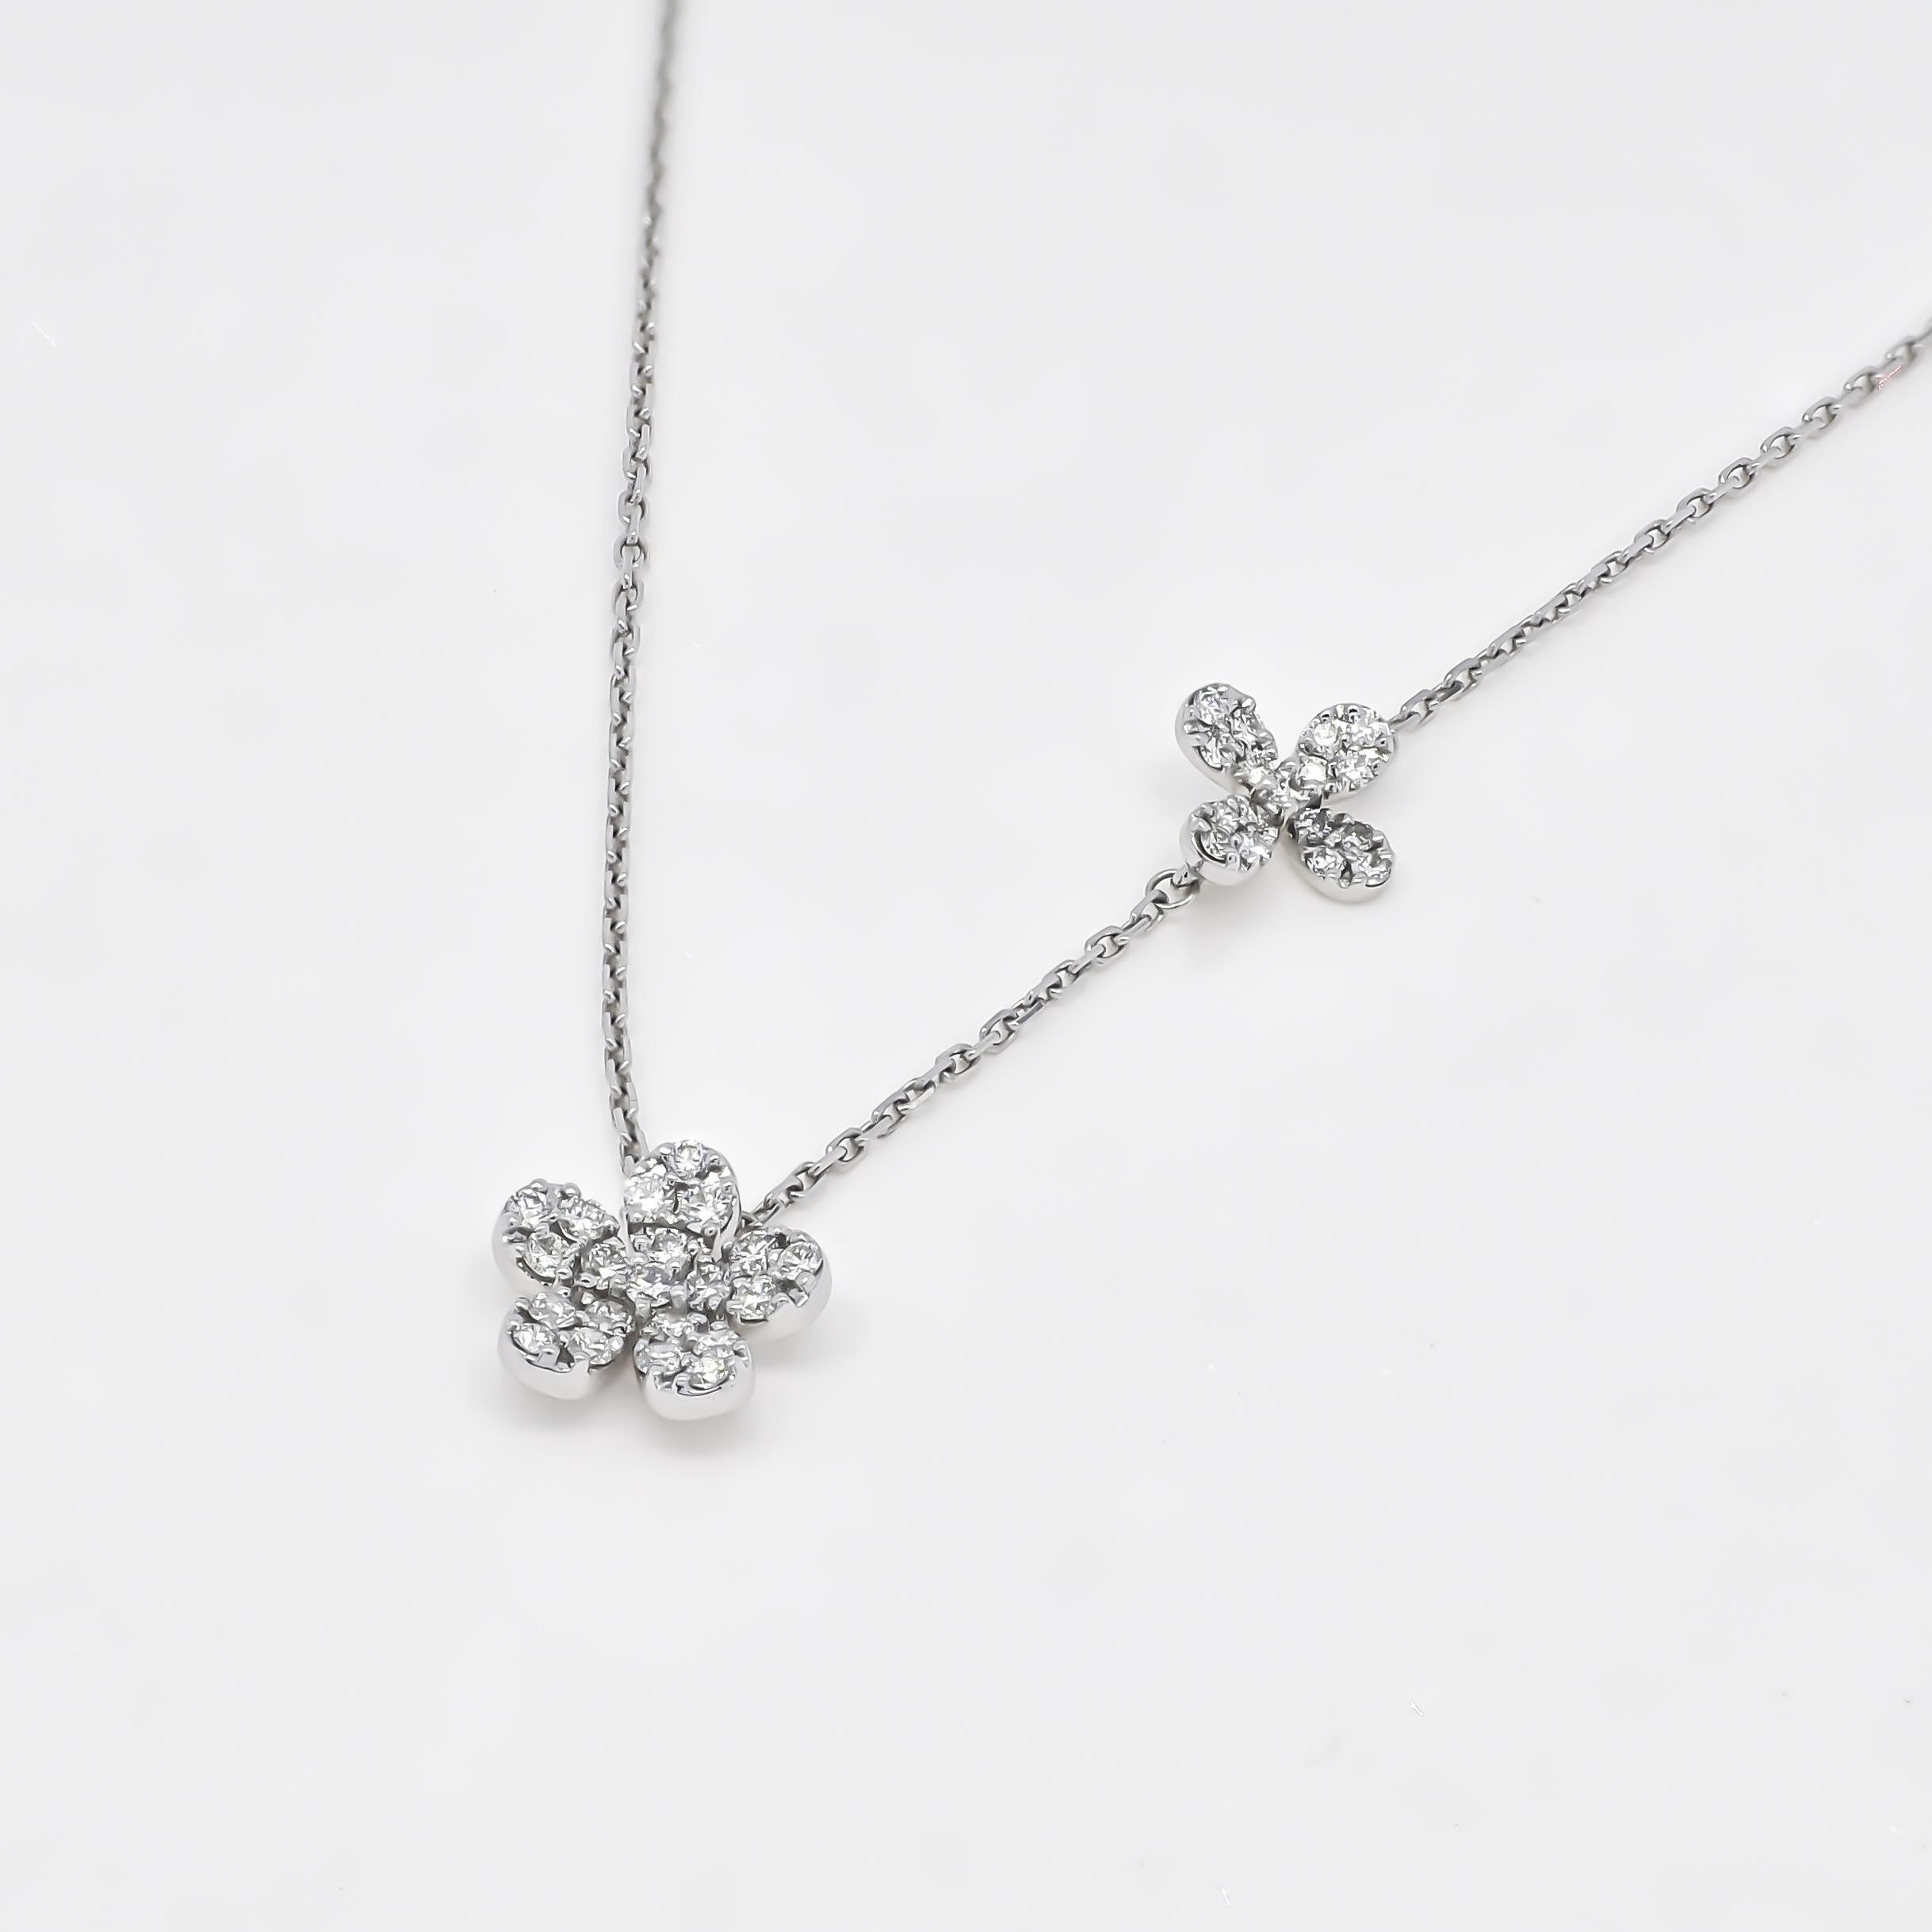 Adding a touch of charm and luck, the pendant features a dainty five-leaf clover, a symbol of good fortune and blessings. This subtle and meaningful element further enhances the necklace's appeal and makes it a perfect gift for that special someone